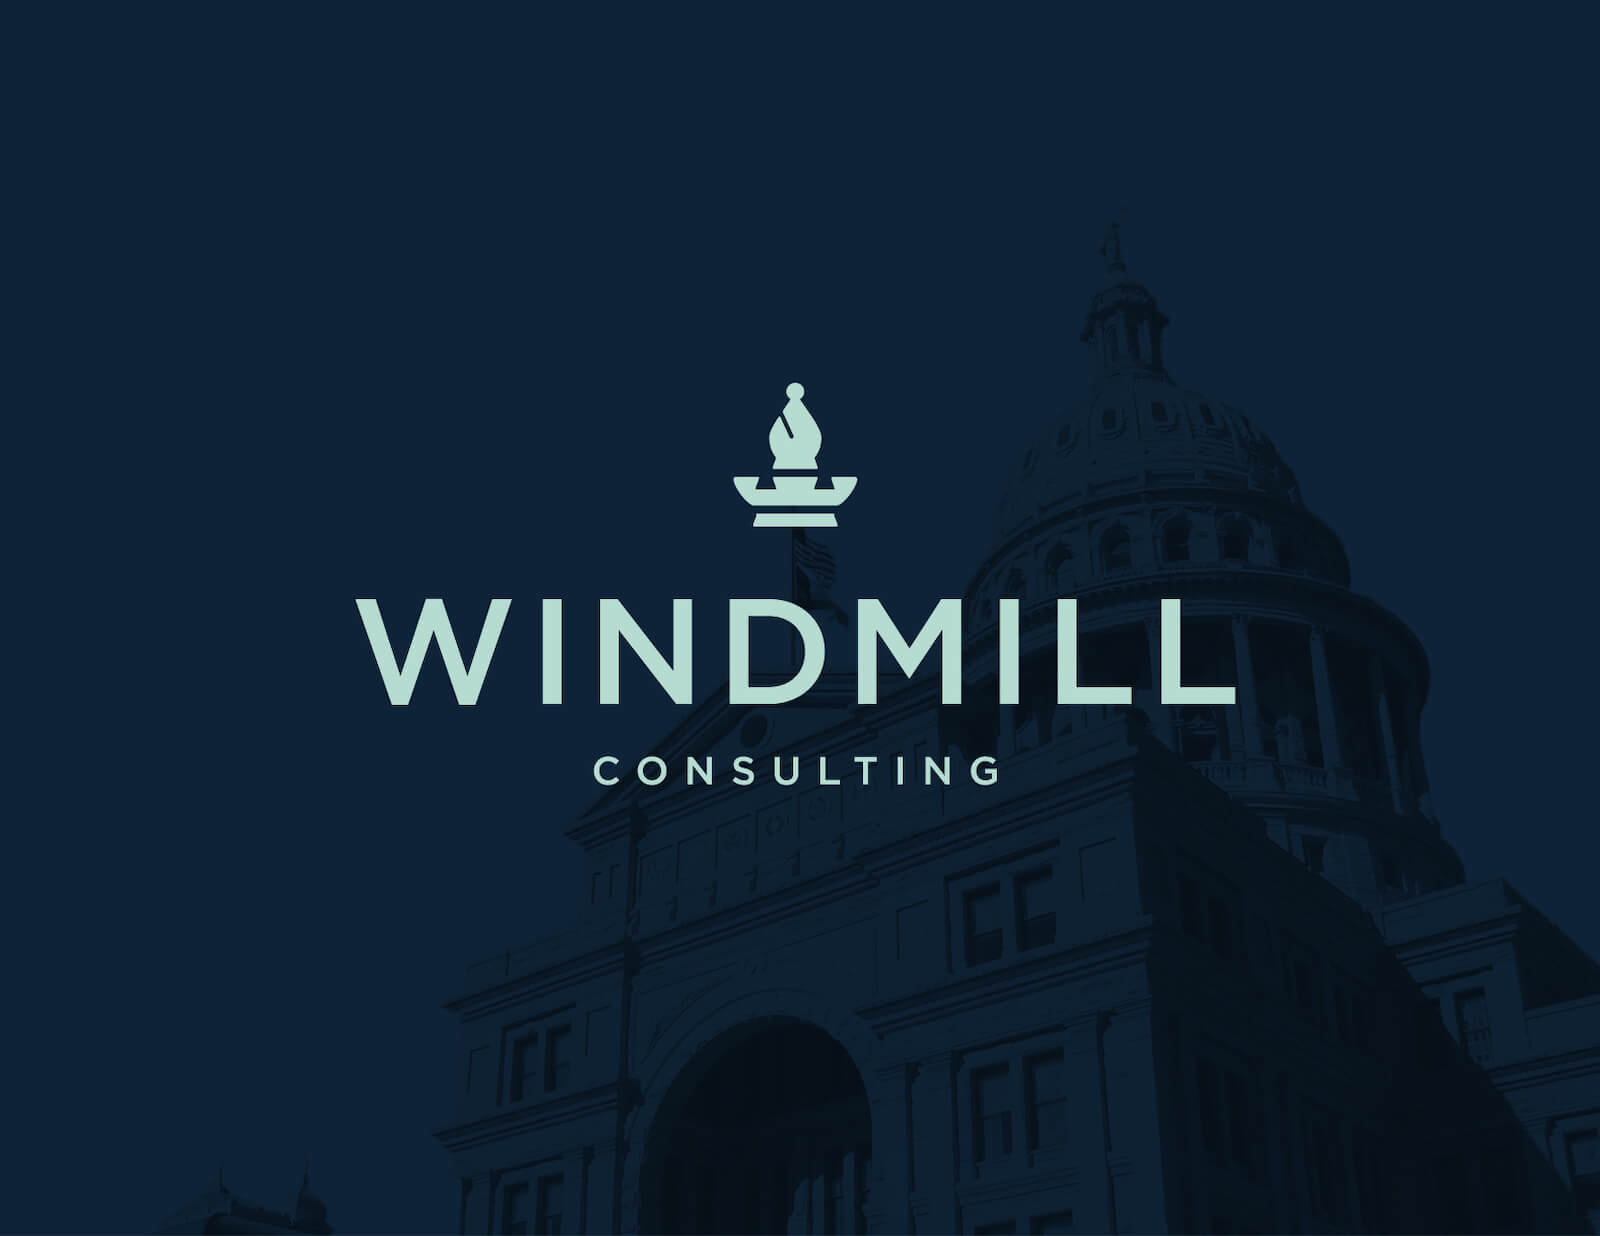 Windmill Consulting Stationery and Business Cards Design